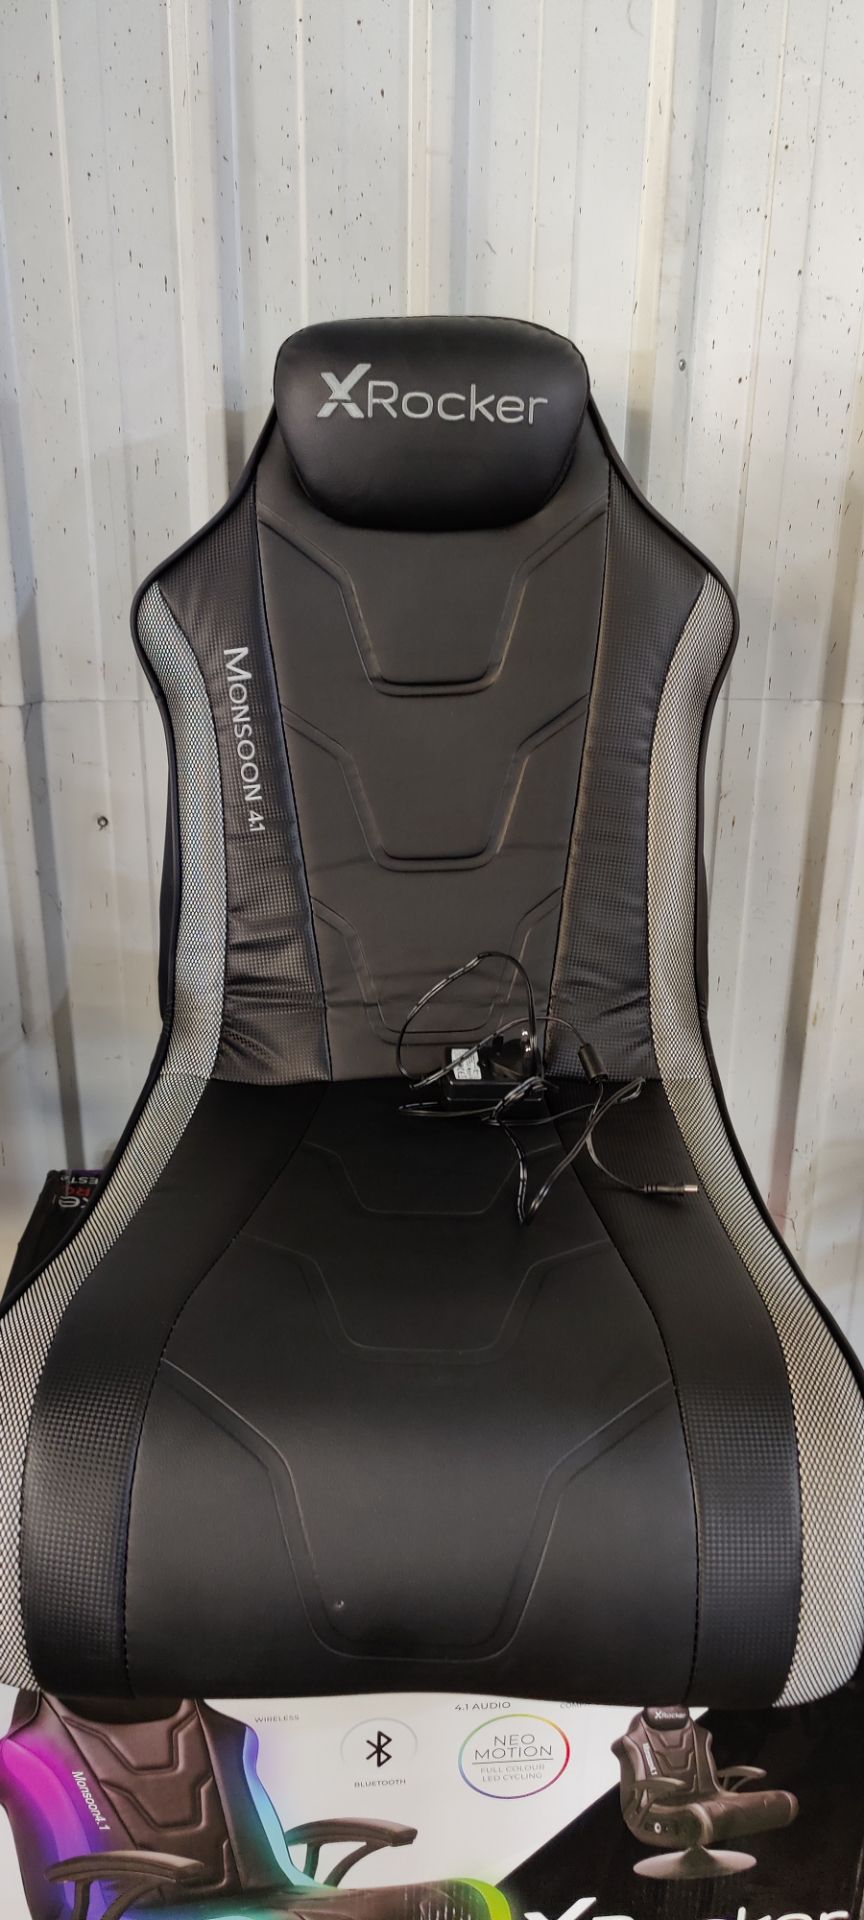 (P1) 1x X-Rocker Monsoon RGB 4.1 Audio Pedestal Gaming Chair RRP £269. Unit Appears Complete, Box - Image 3 of 5